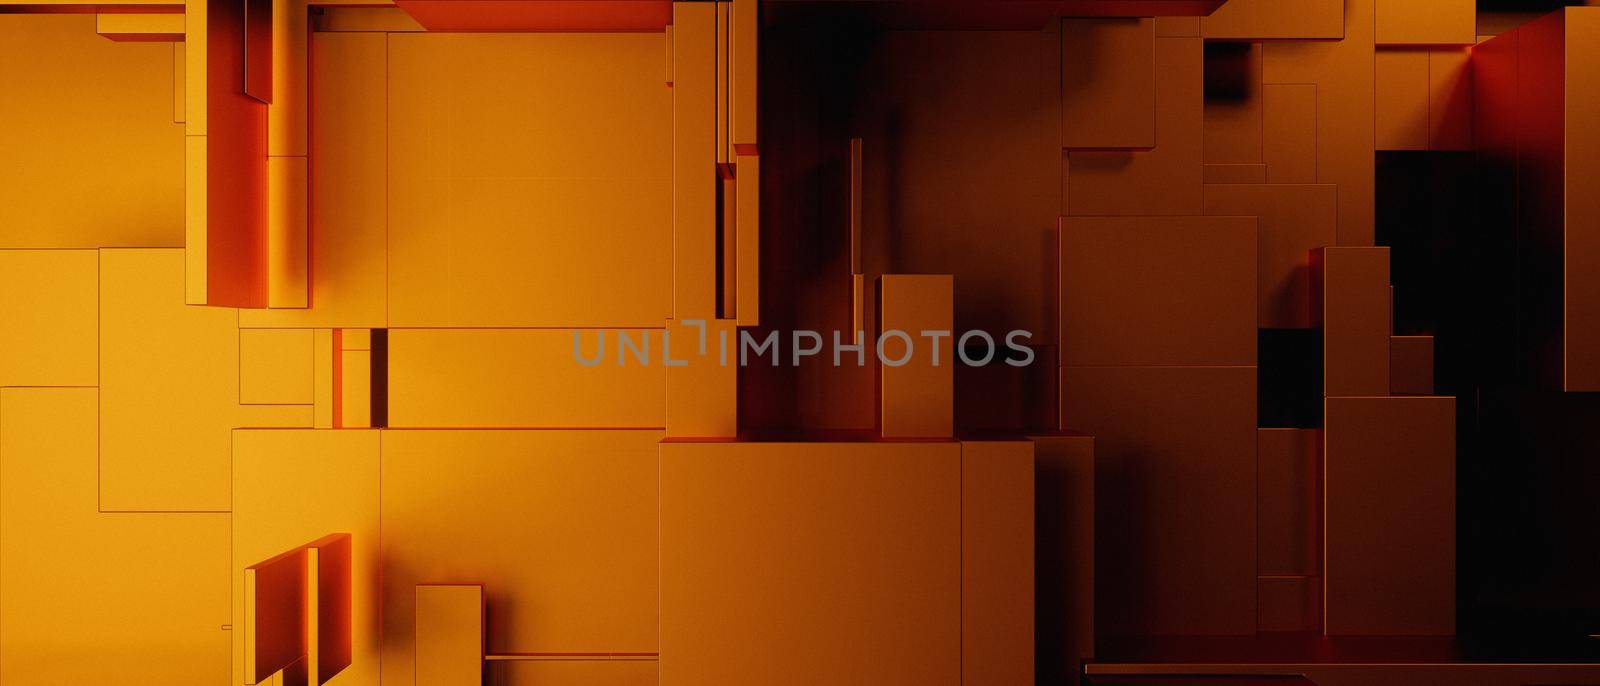 Abstract Geometric Blocks Future Red Brown Banner Background Wallpaper 3D Illustration